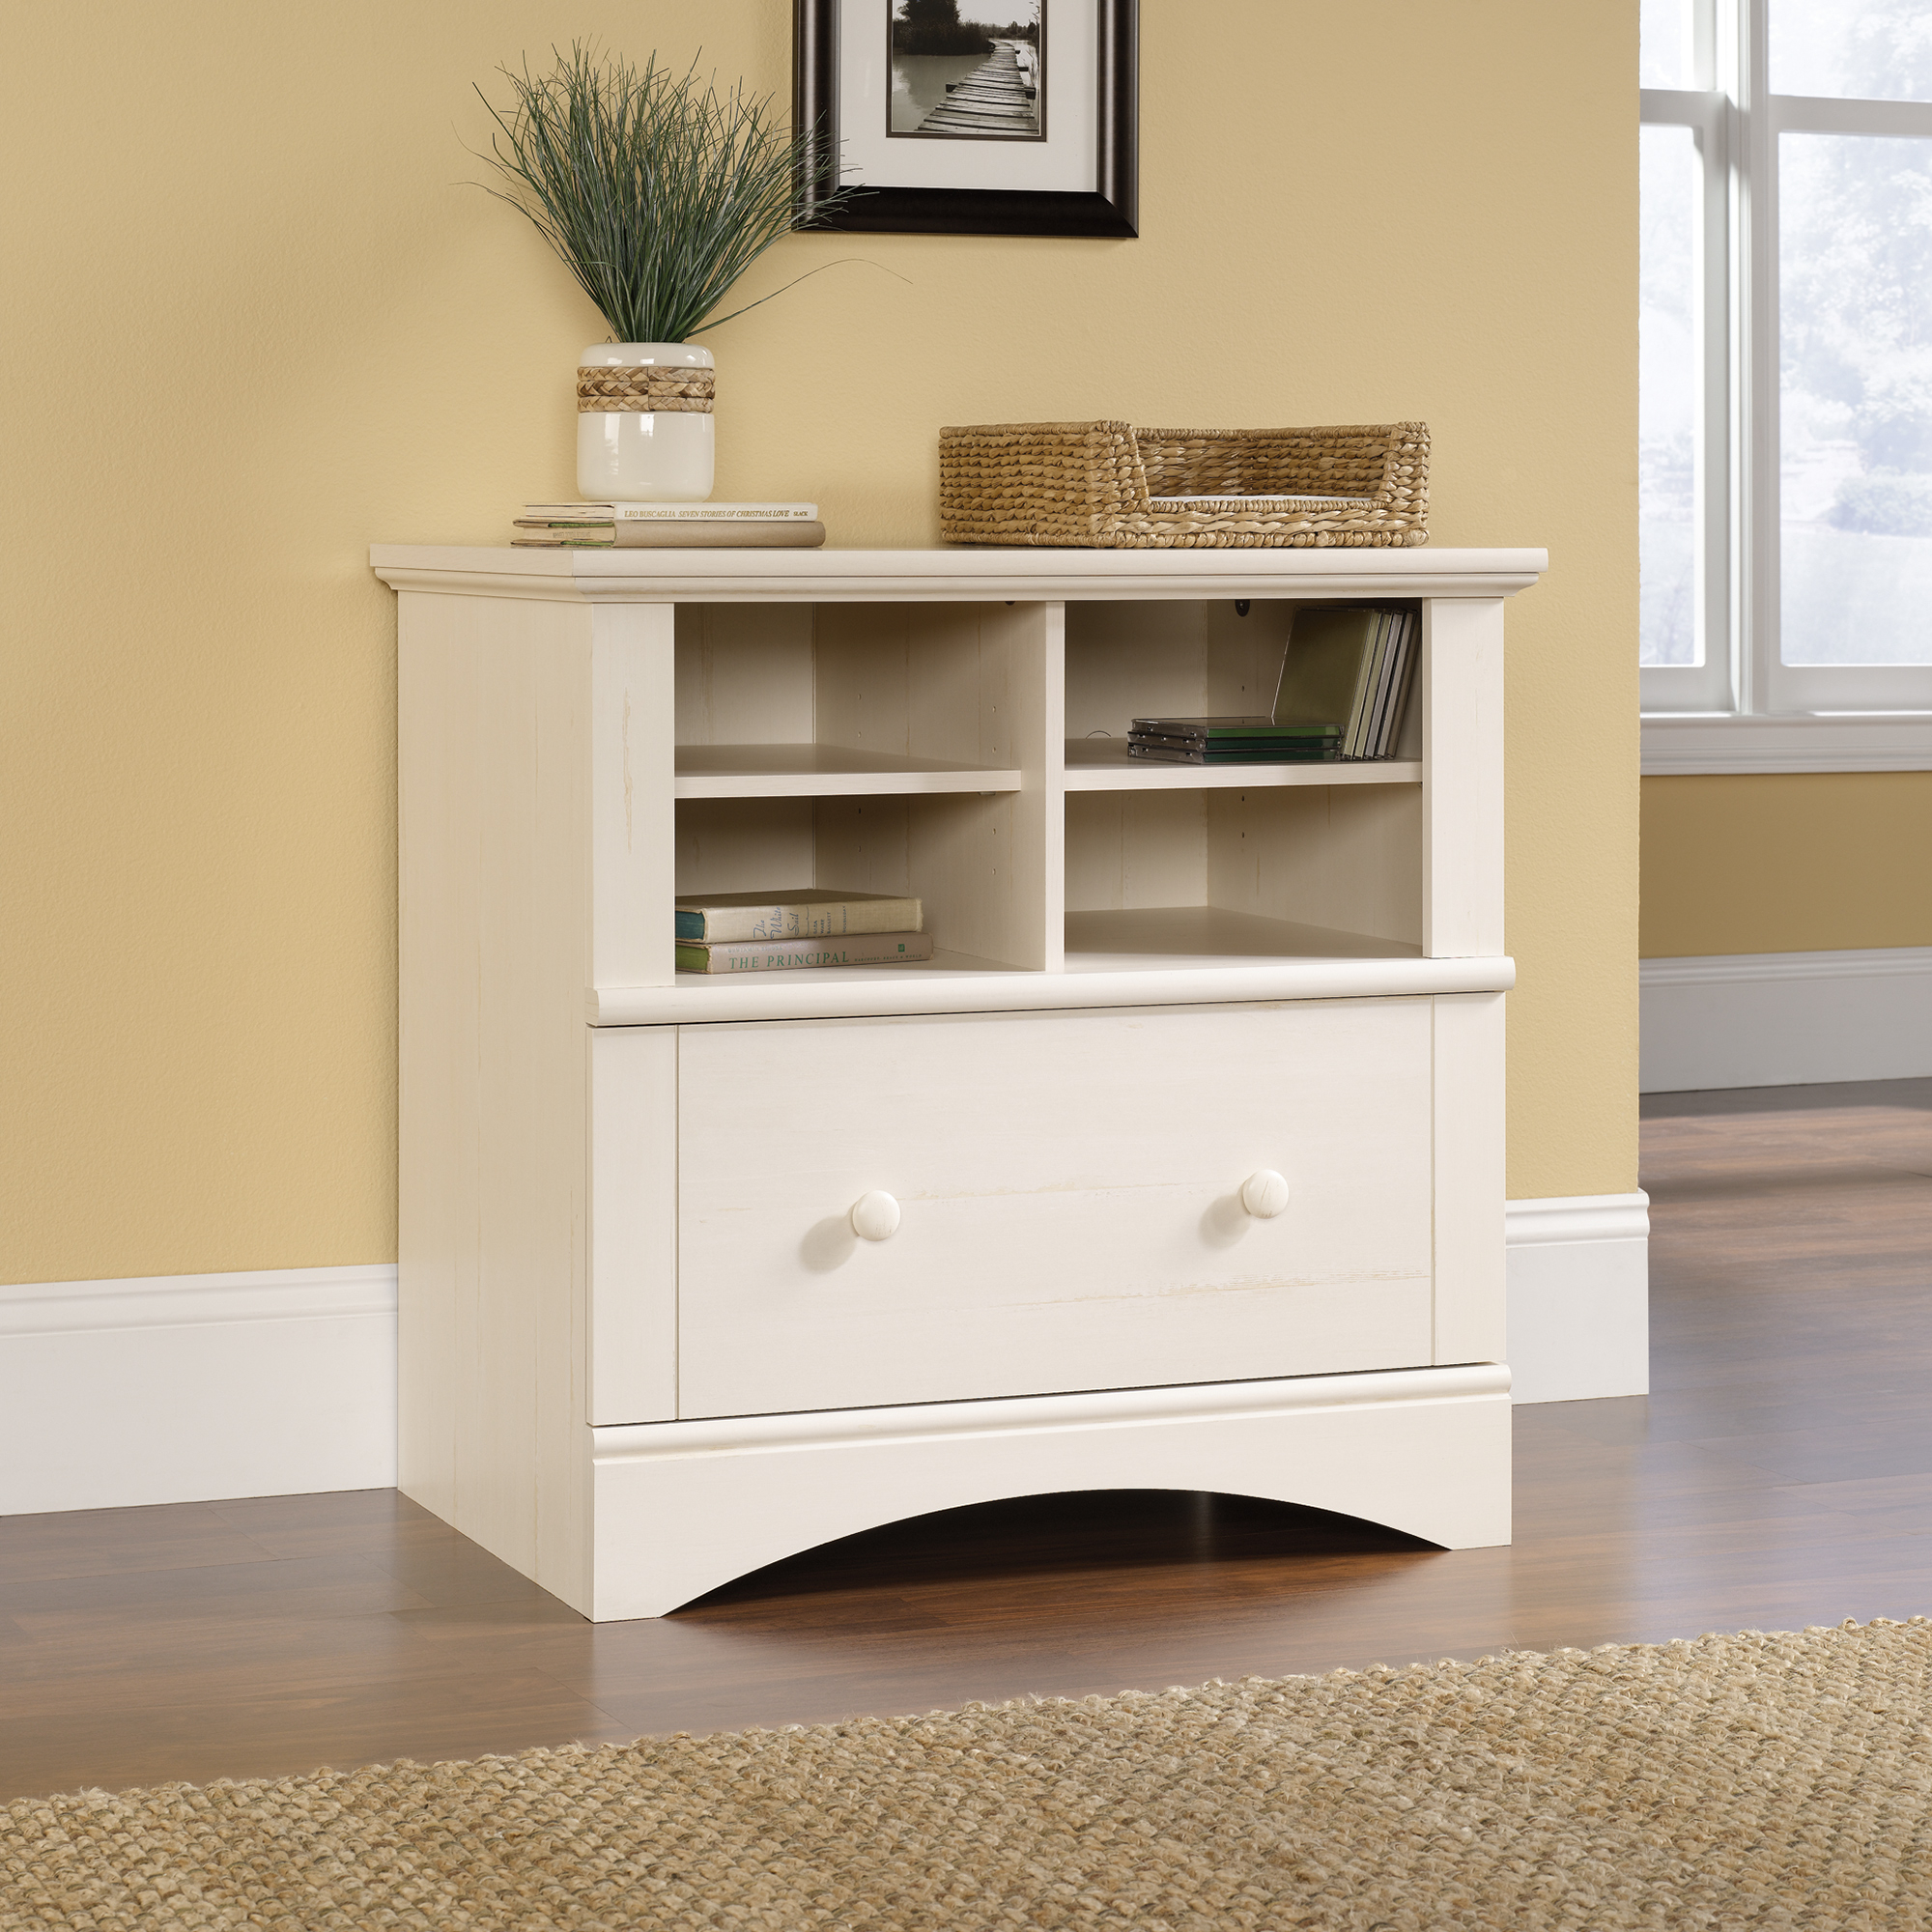 Sauder Harbor View Lateral File 158002 Sauder The Furniture Co throughout dimensions 2000 X 2000